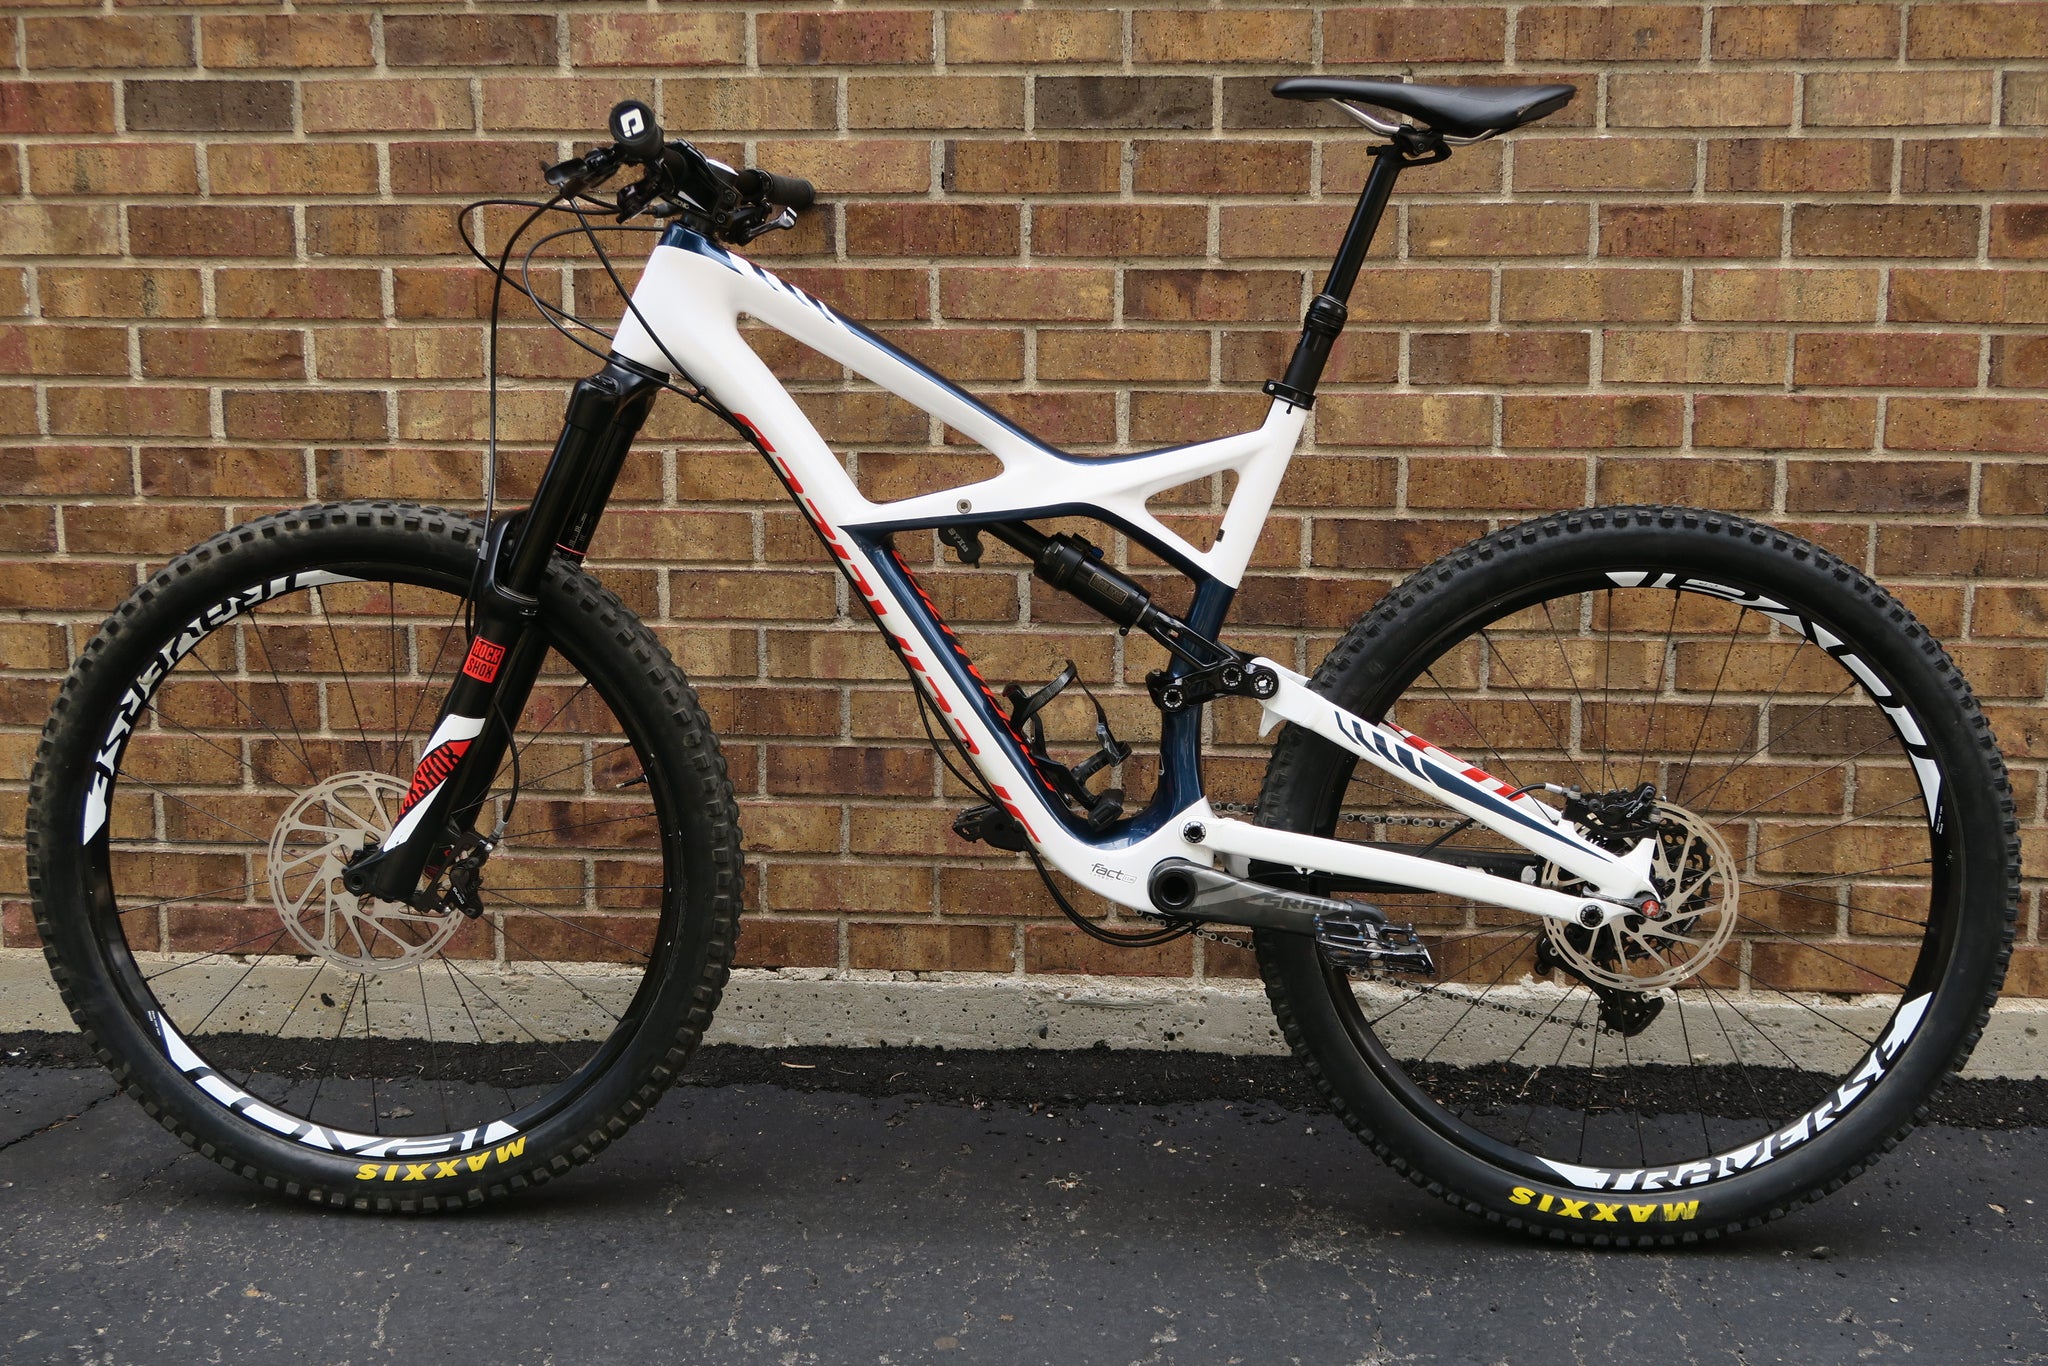 2016 SPECIALIZED ENDURO EXPERT CARBON 650B 27.5"